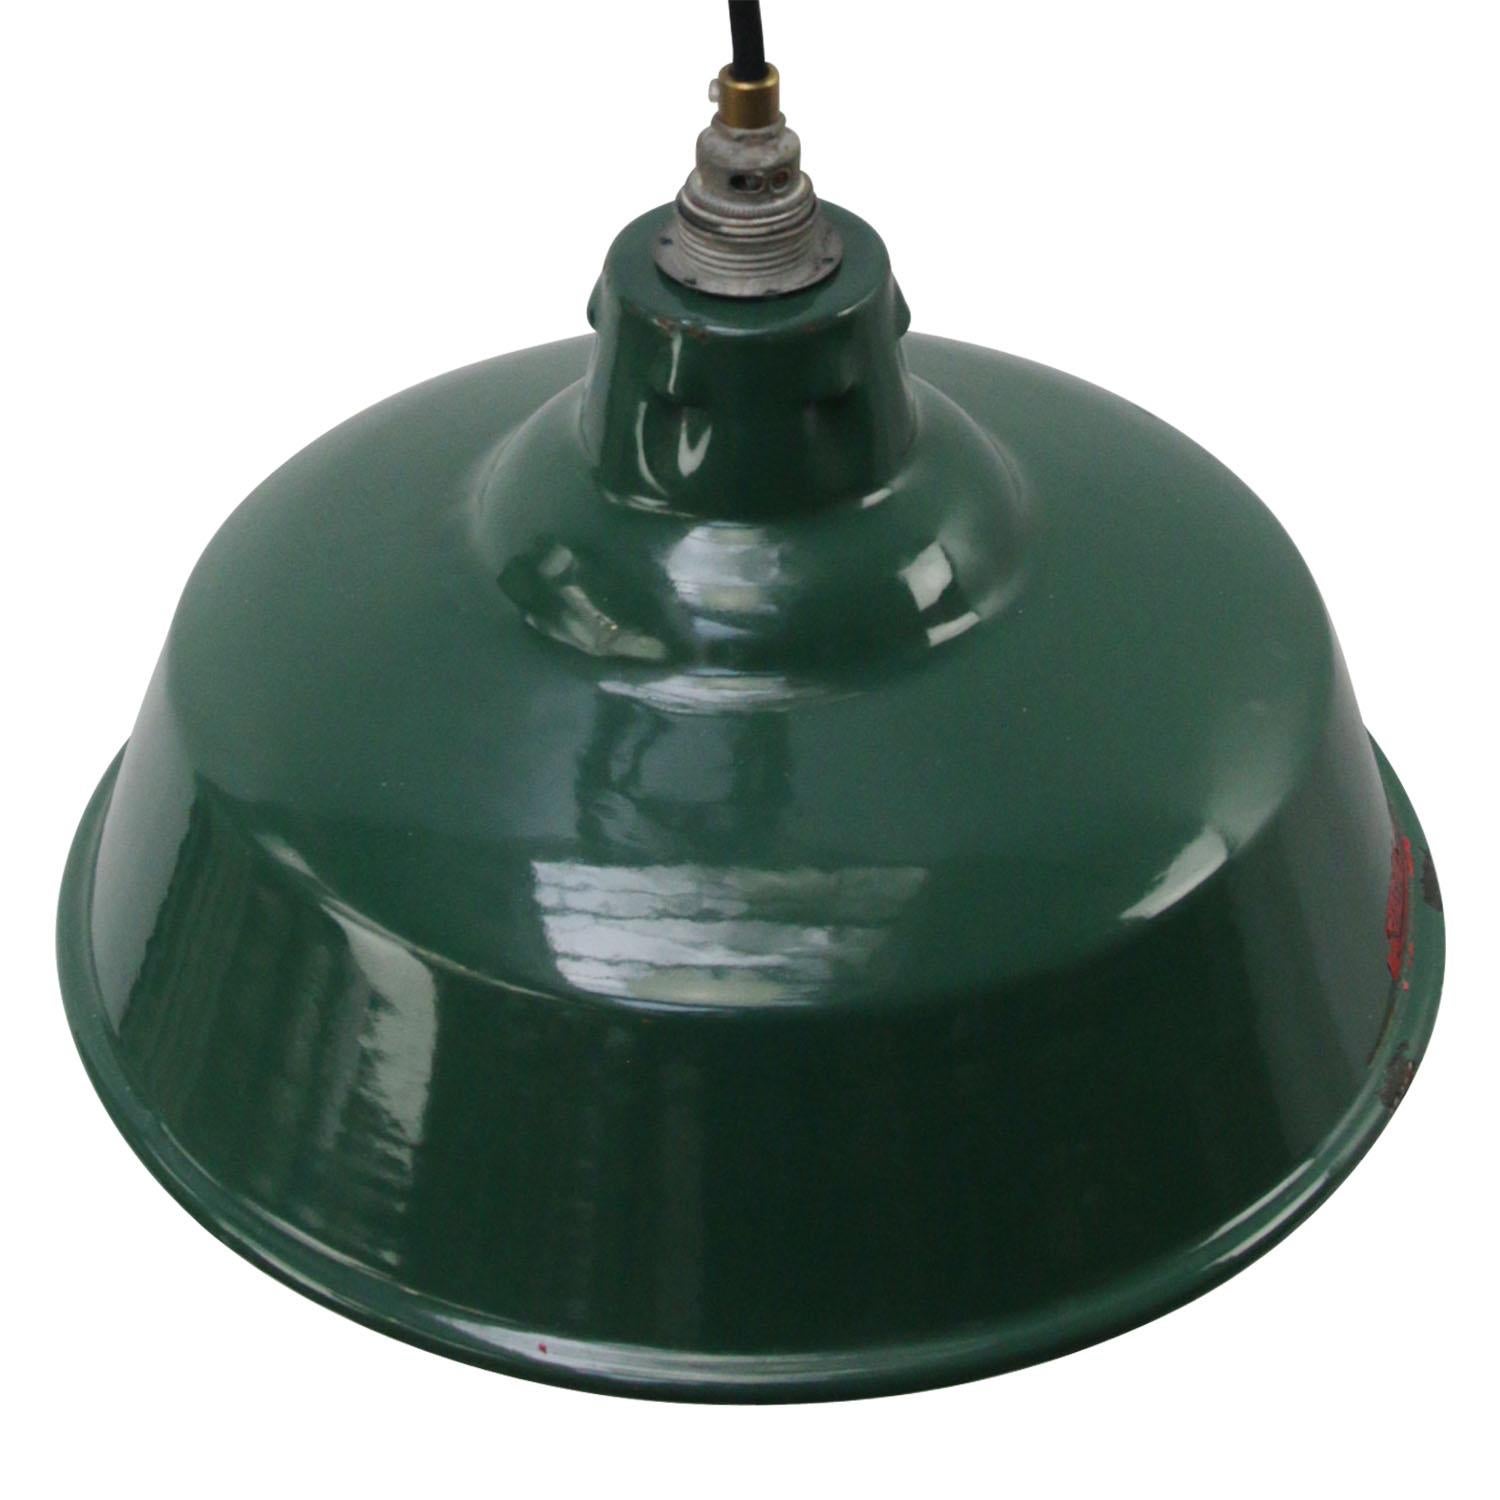 British warehouse, industrial pendant by Simplex Electric Co. UK
Green enamel shade with white interior. 

Bulb holder E14 screw

Weight: 1.30 kg / 2.9 lb

Priced per individual item. All lamps have been made suitable by international